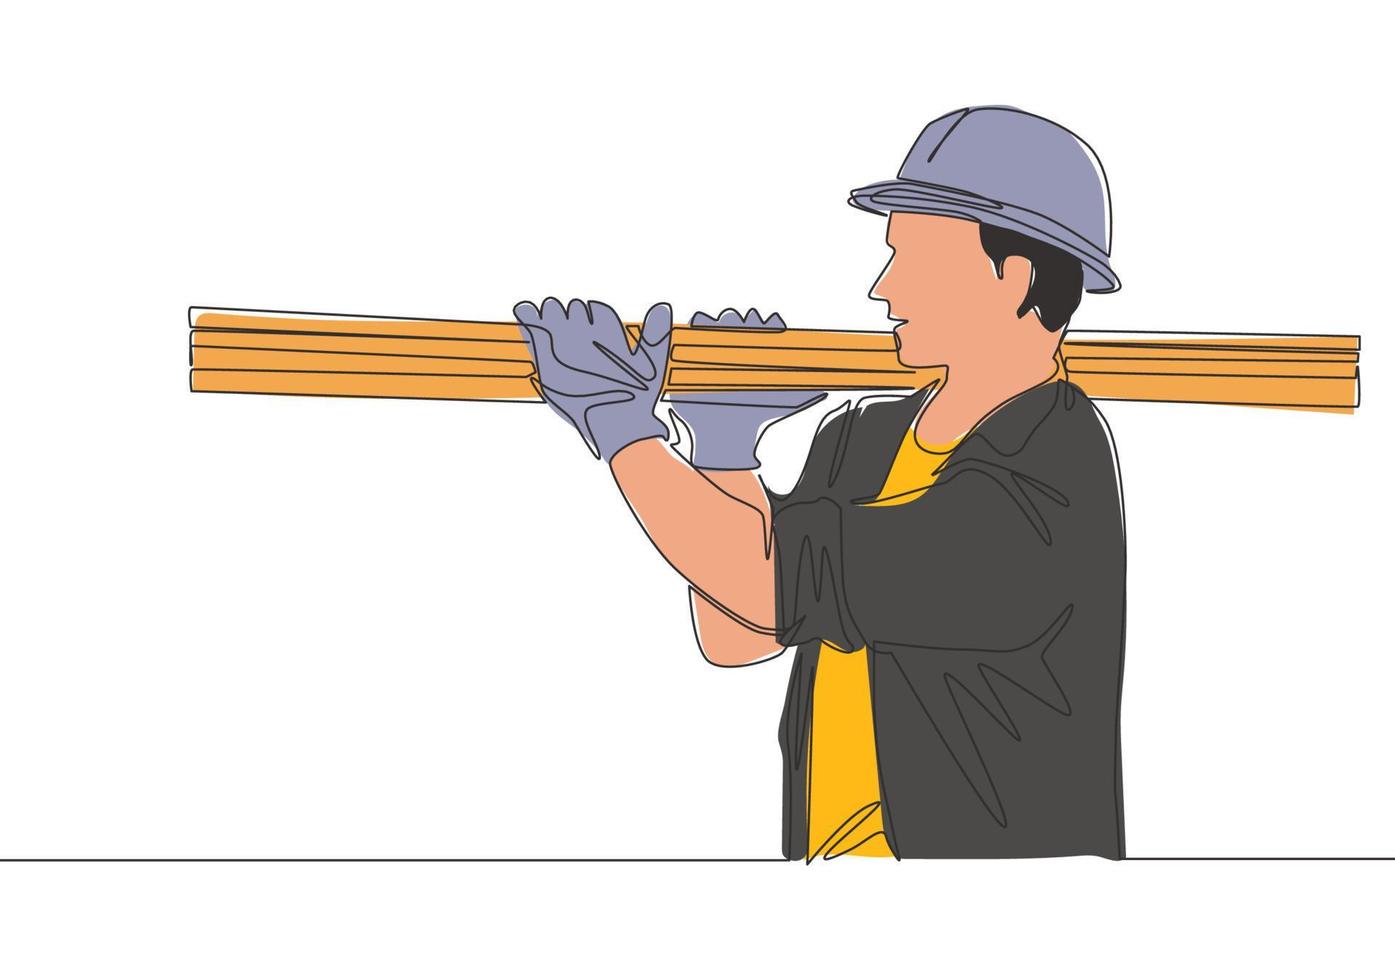 Single continuous line drawing of young lumberjack wearing helmet and glove while carrying pile of woods. Carpenter building maintenance service concept. One line draw design illustration vector